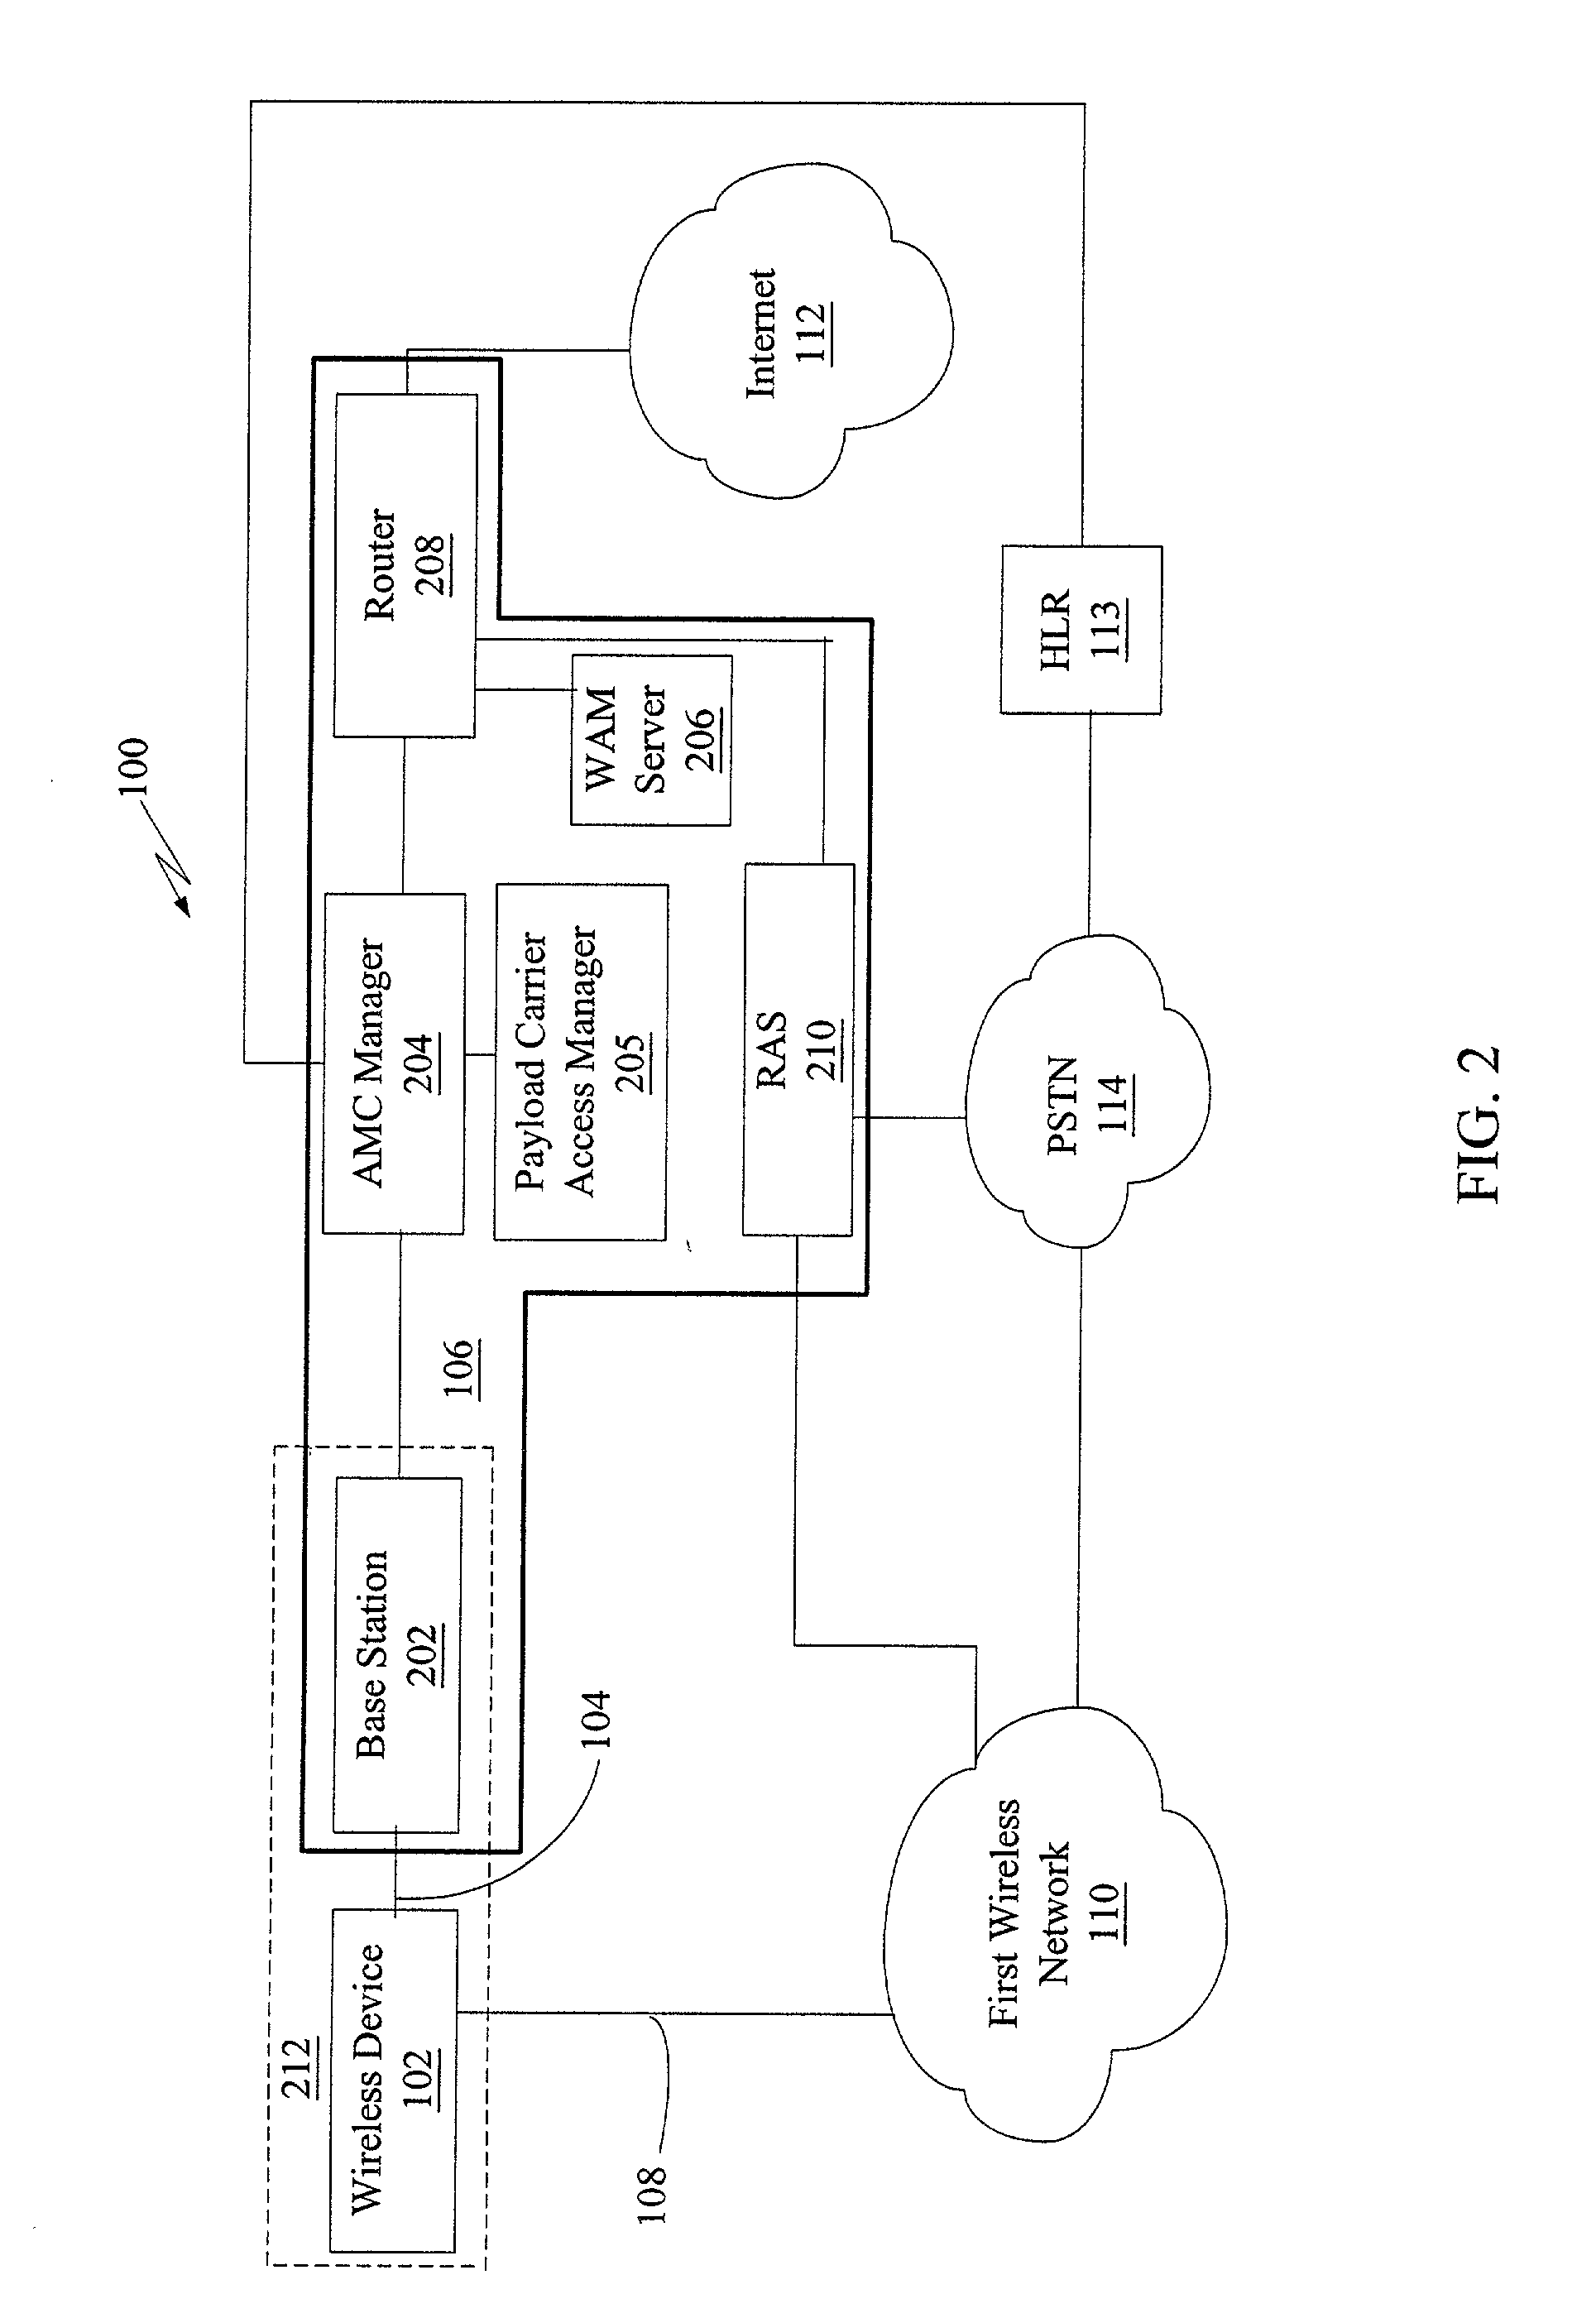 Method and system for high speed wireless broadcast data transmission and reception